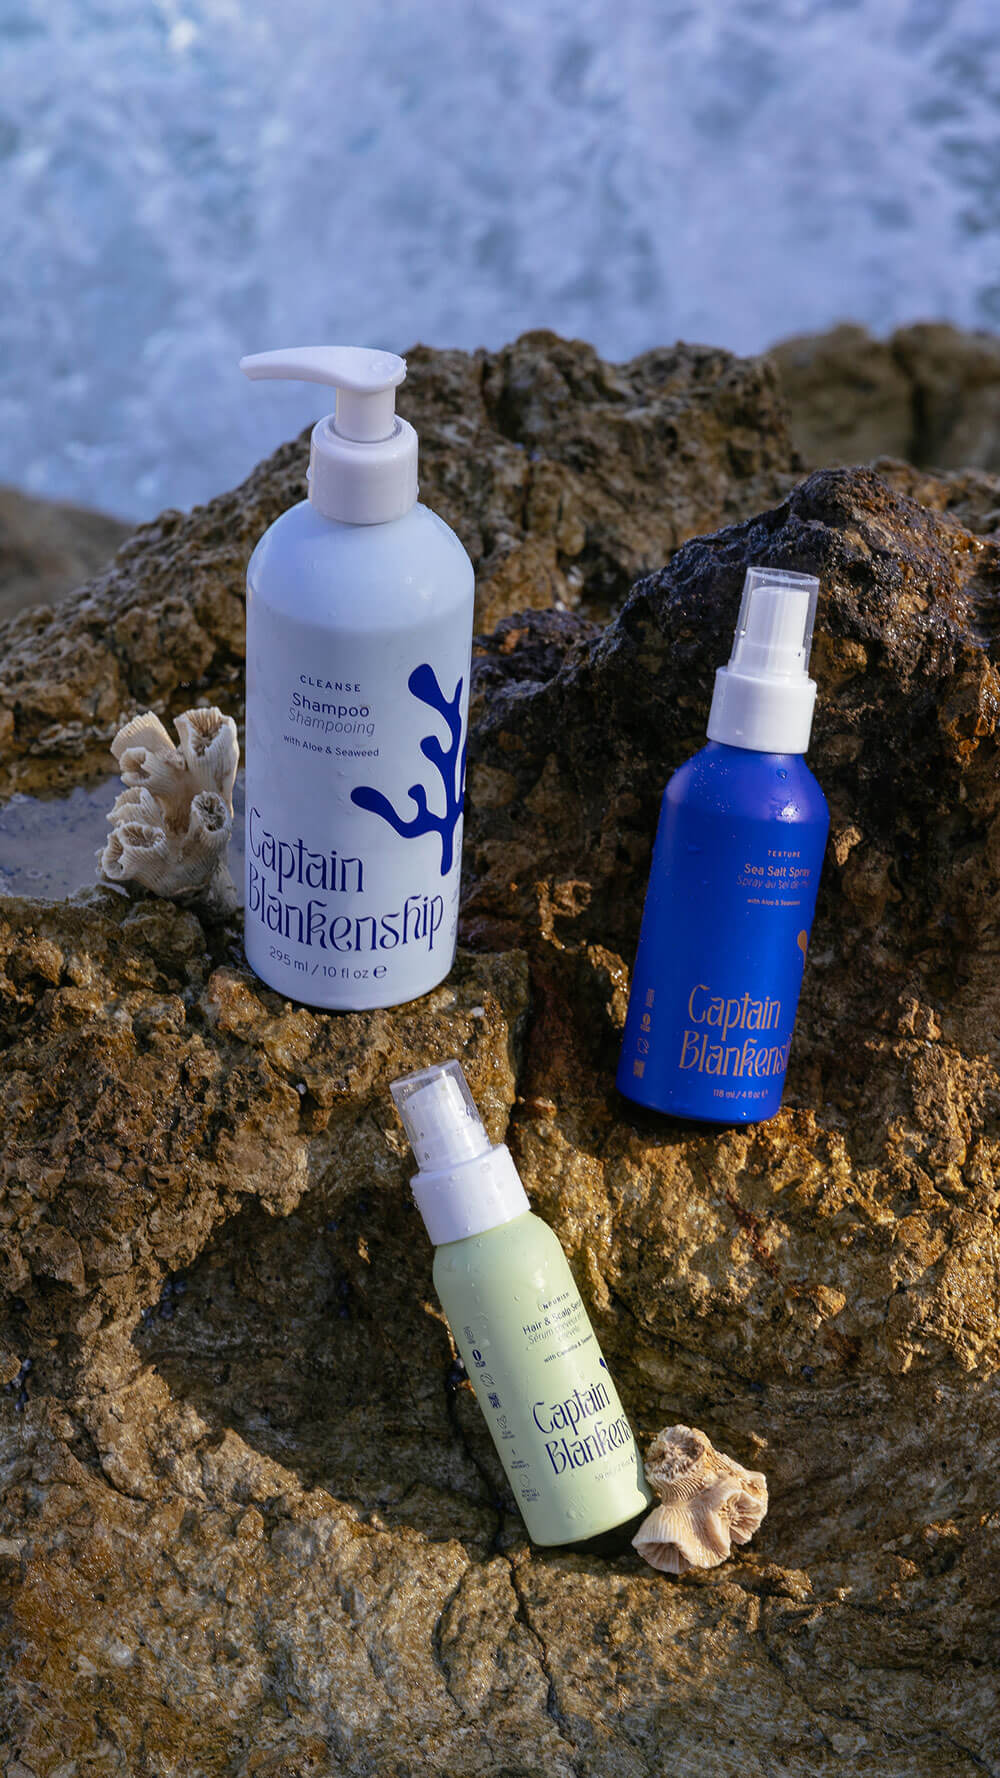 Captain Blankenship Hydrate Conditioner with Aloe and Shea Butter, Texture Sea Salt Spray with Aloe and Seaweed, and Nourish Hair and Scalp Serum with Argan and Camellia on a rock